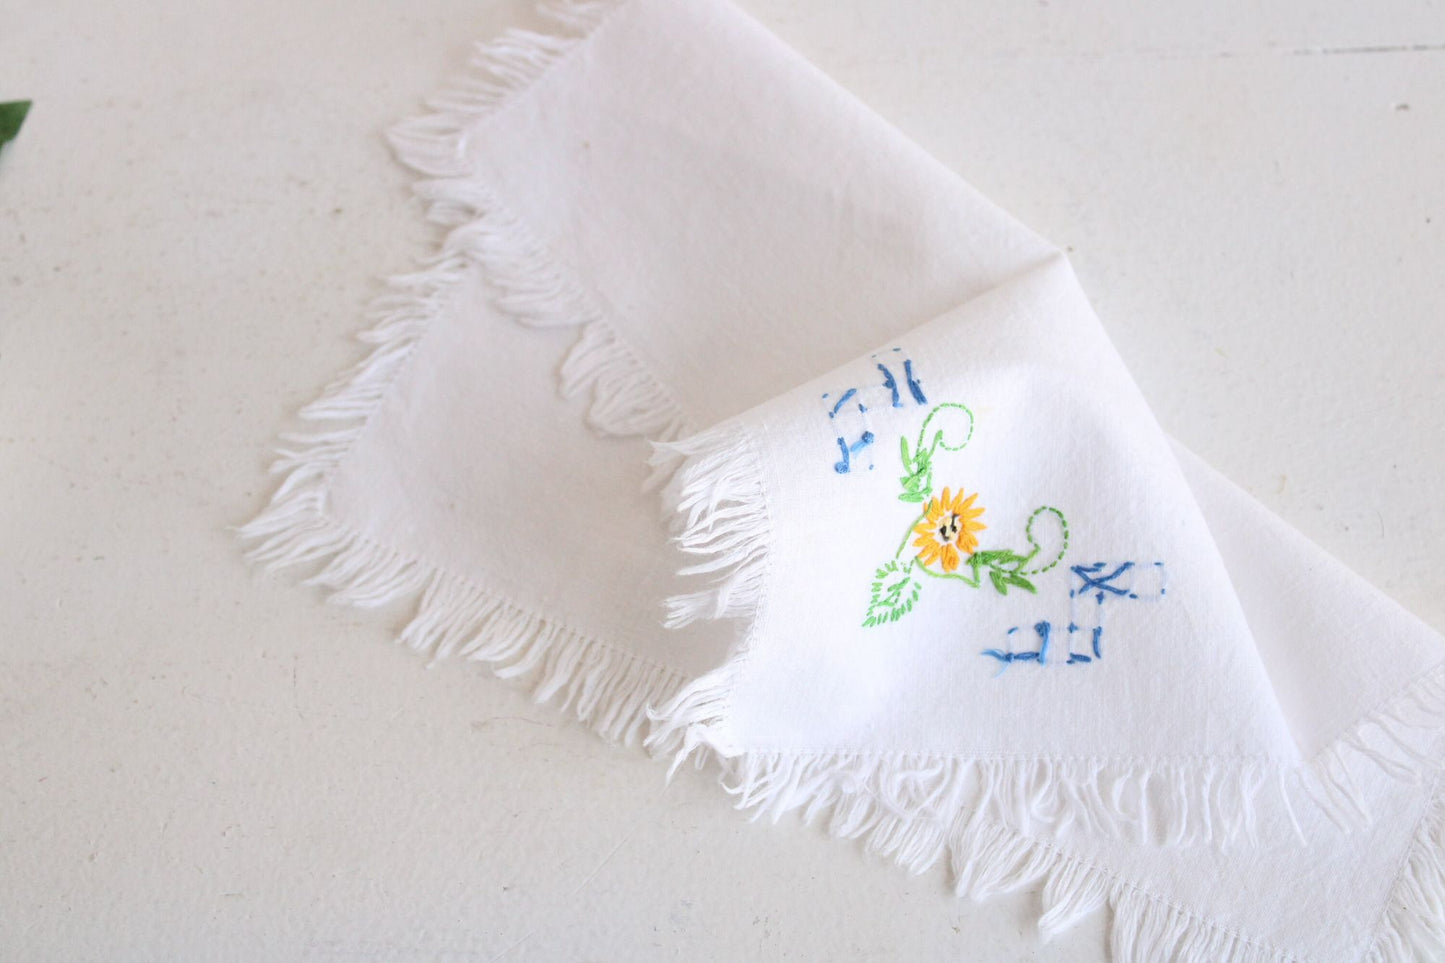 Vintage 1960s 1970s White Cotton With Embroidered Flowers and Fringe Hankie